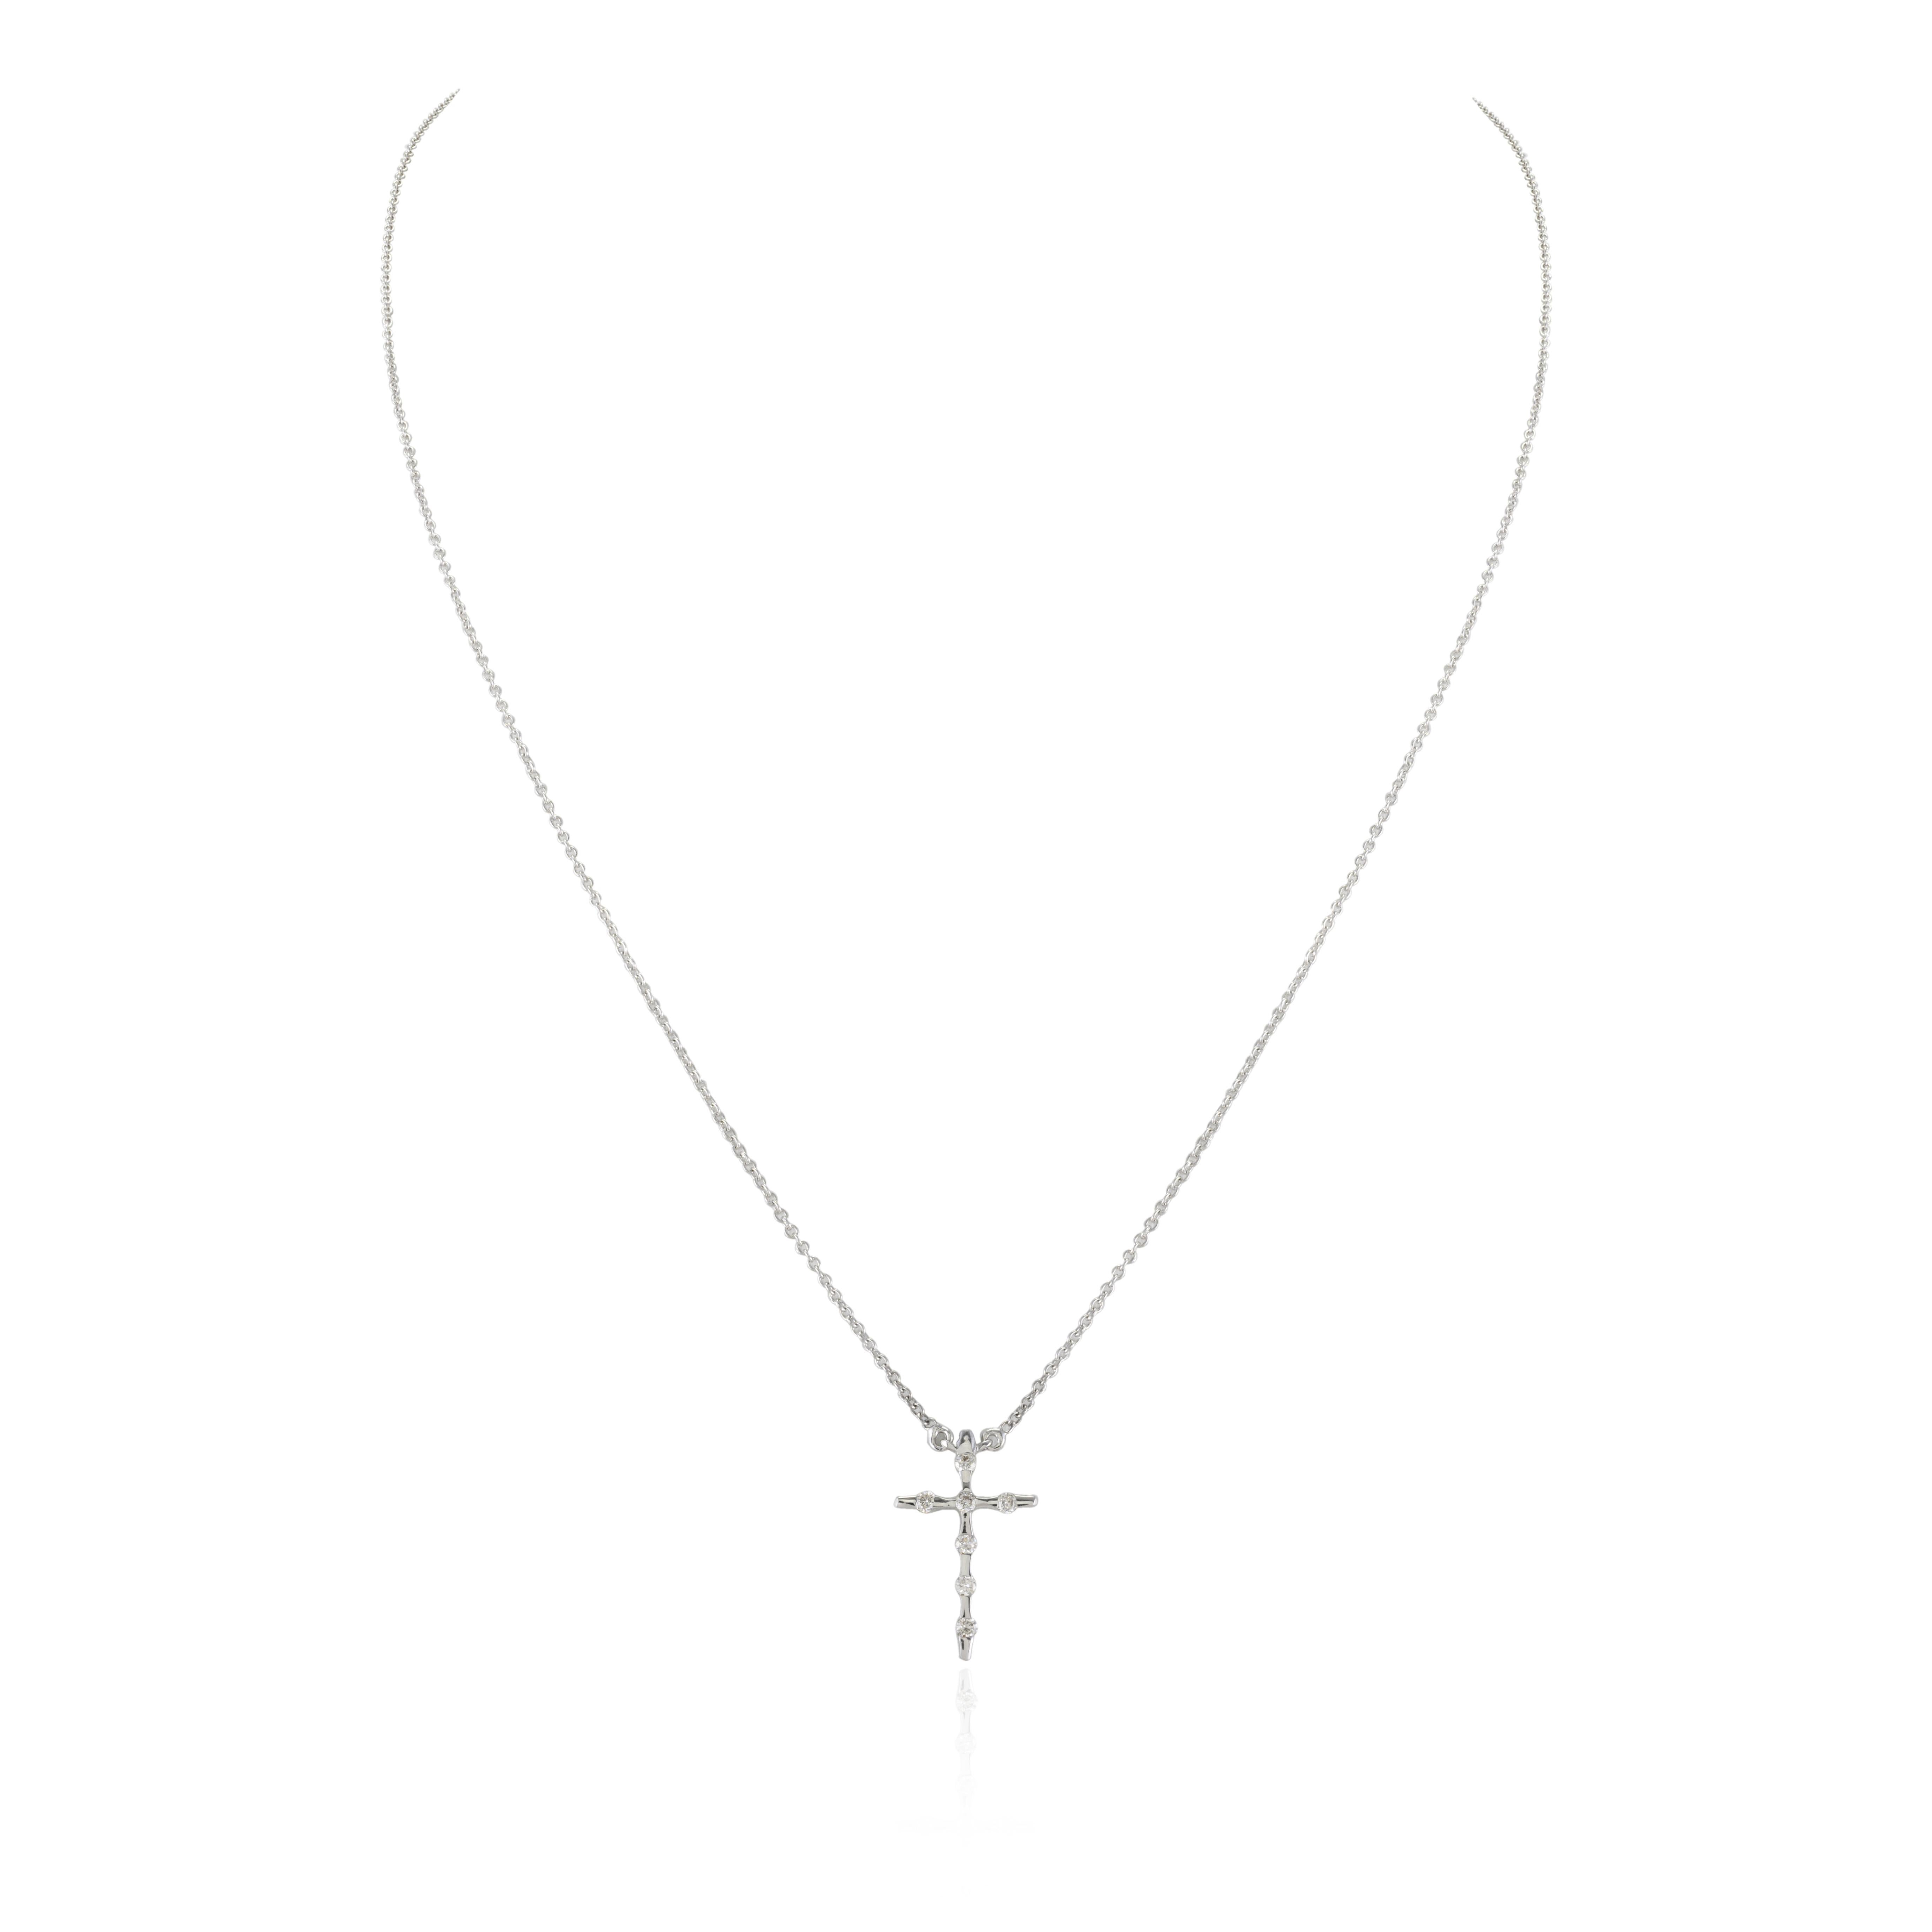 Unisex Diamond Cross Pendant Necklace in 18K Gold studded with round cut diamonds. This stunning piece of jewelry instantly elevates a casual look or dressy outfit. 
April birthstone diamond brings love, fame, success and prosperity.
Designed with